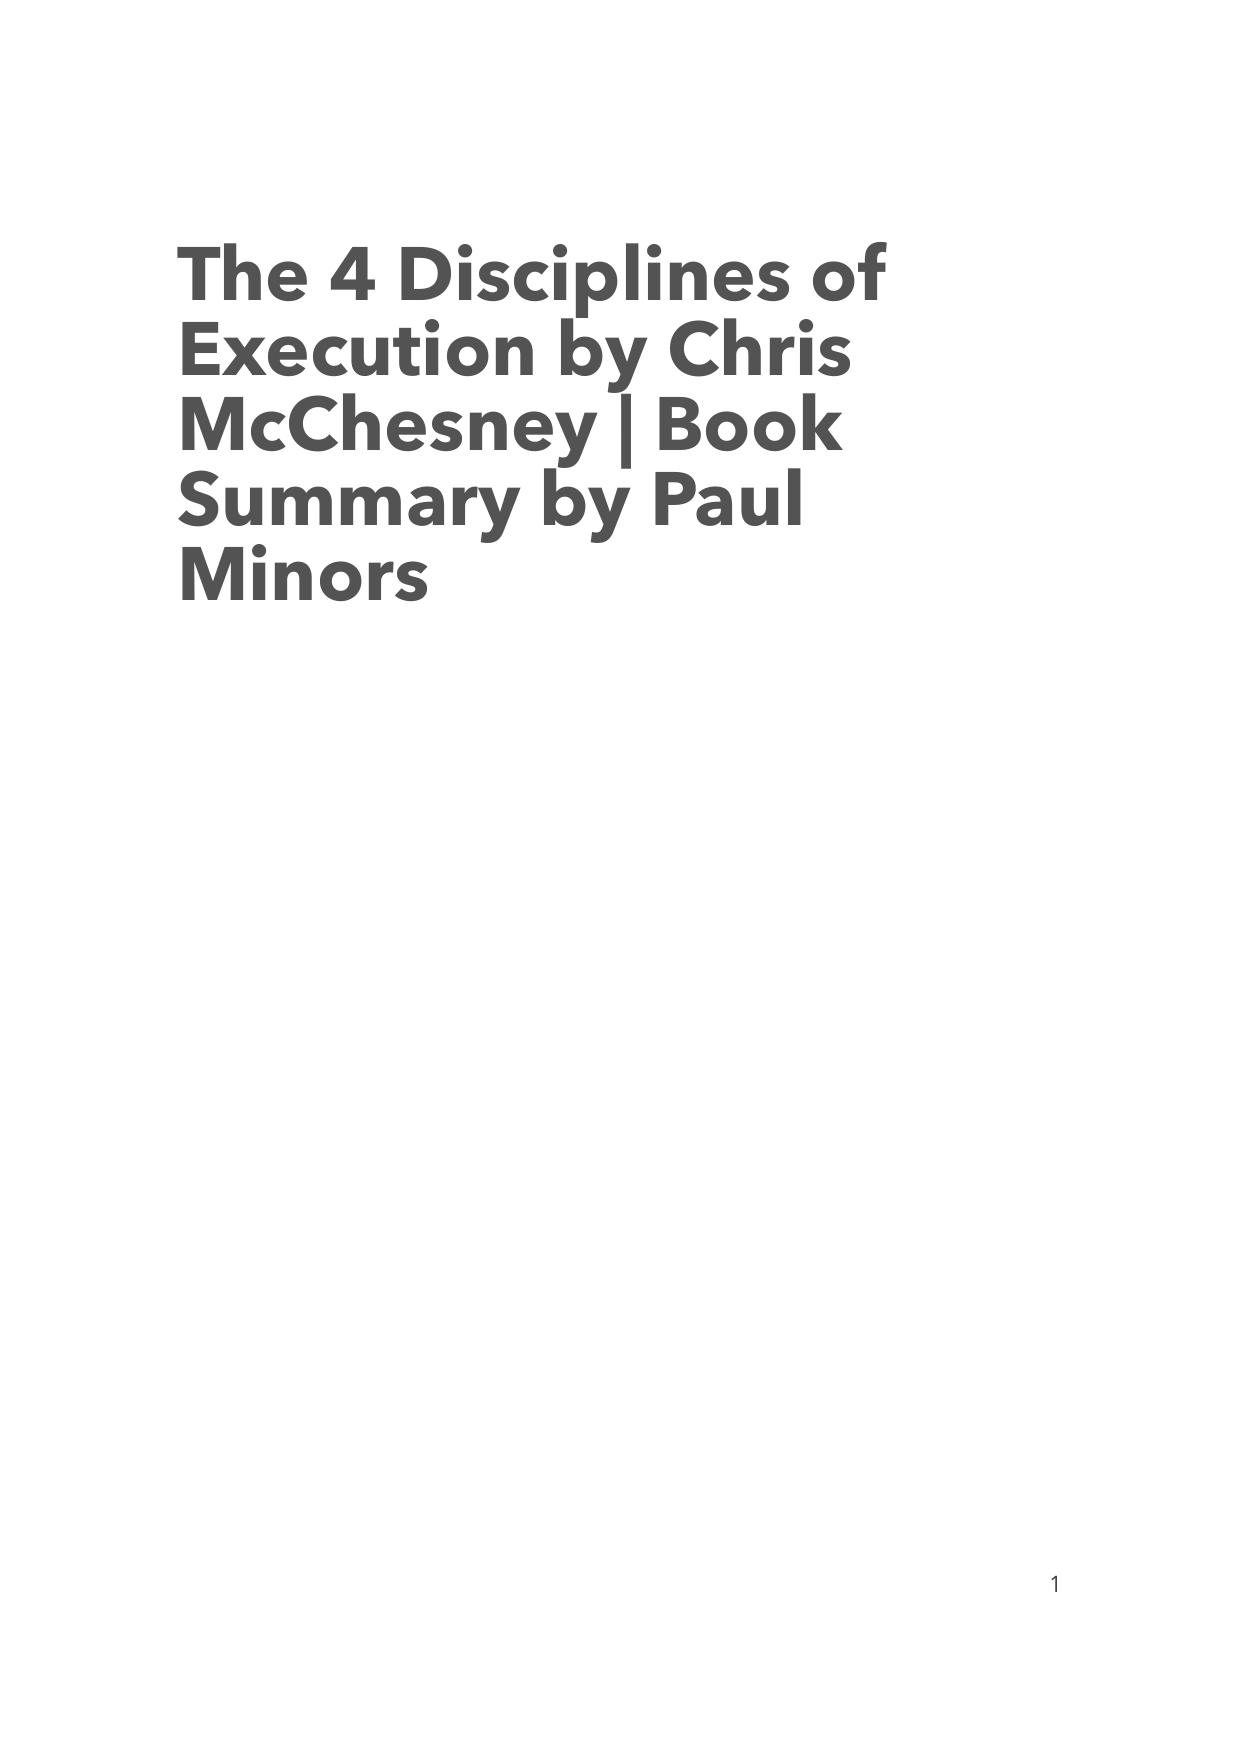 The 4 Disciplines of Execution by Chris McChesney Book Summary